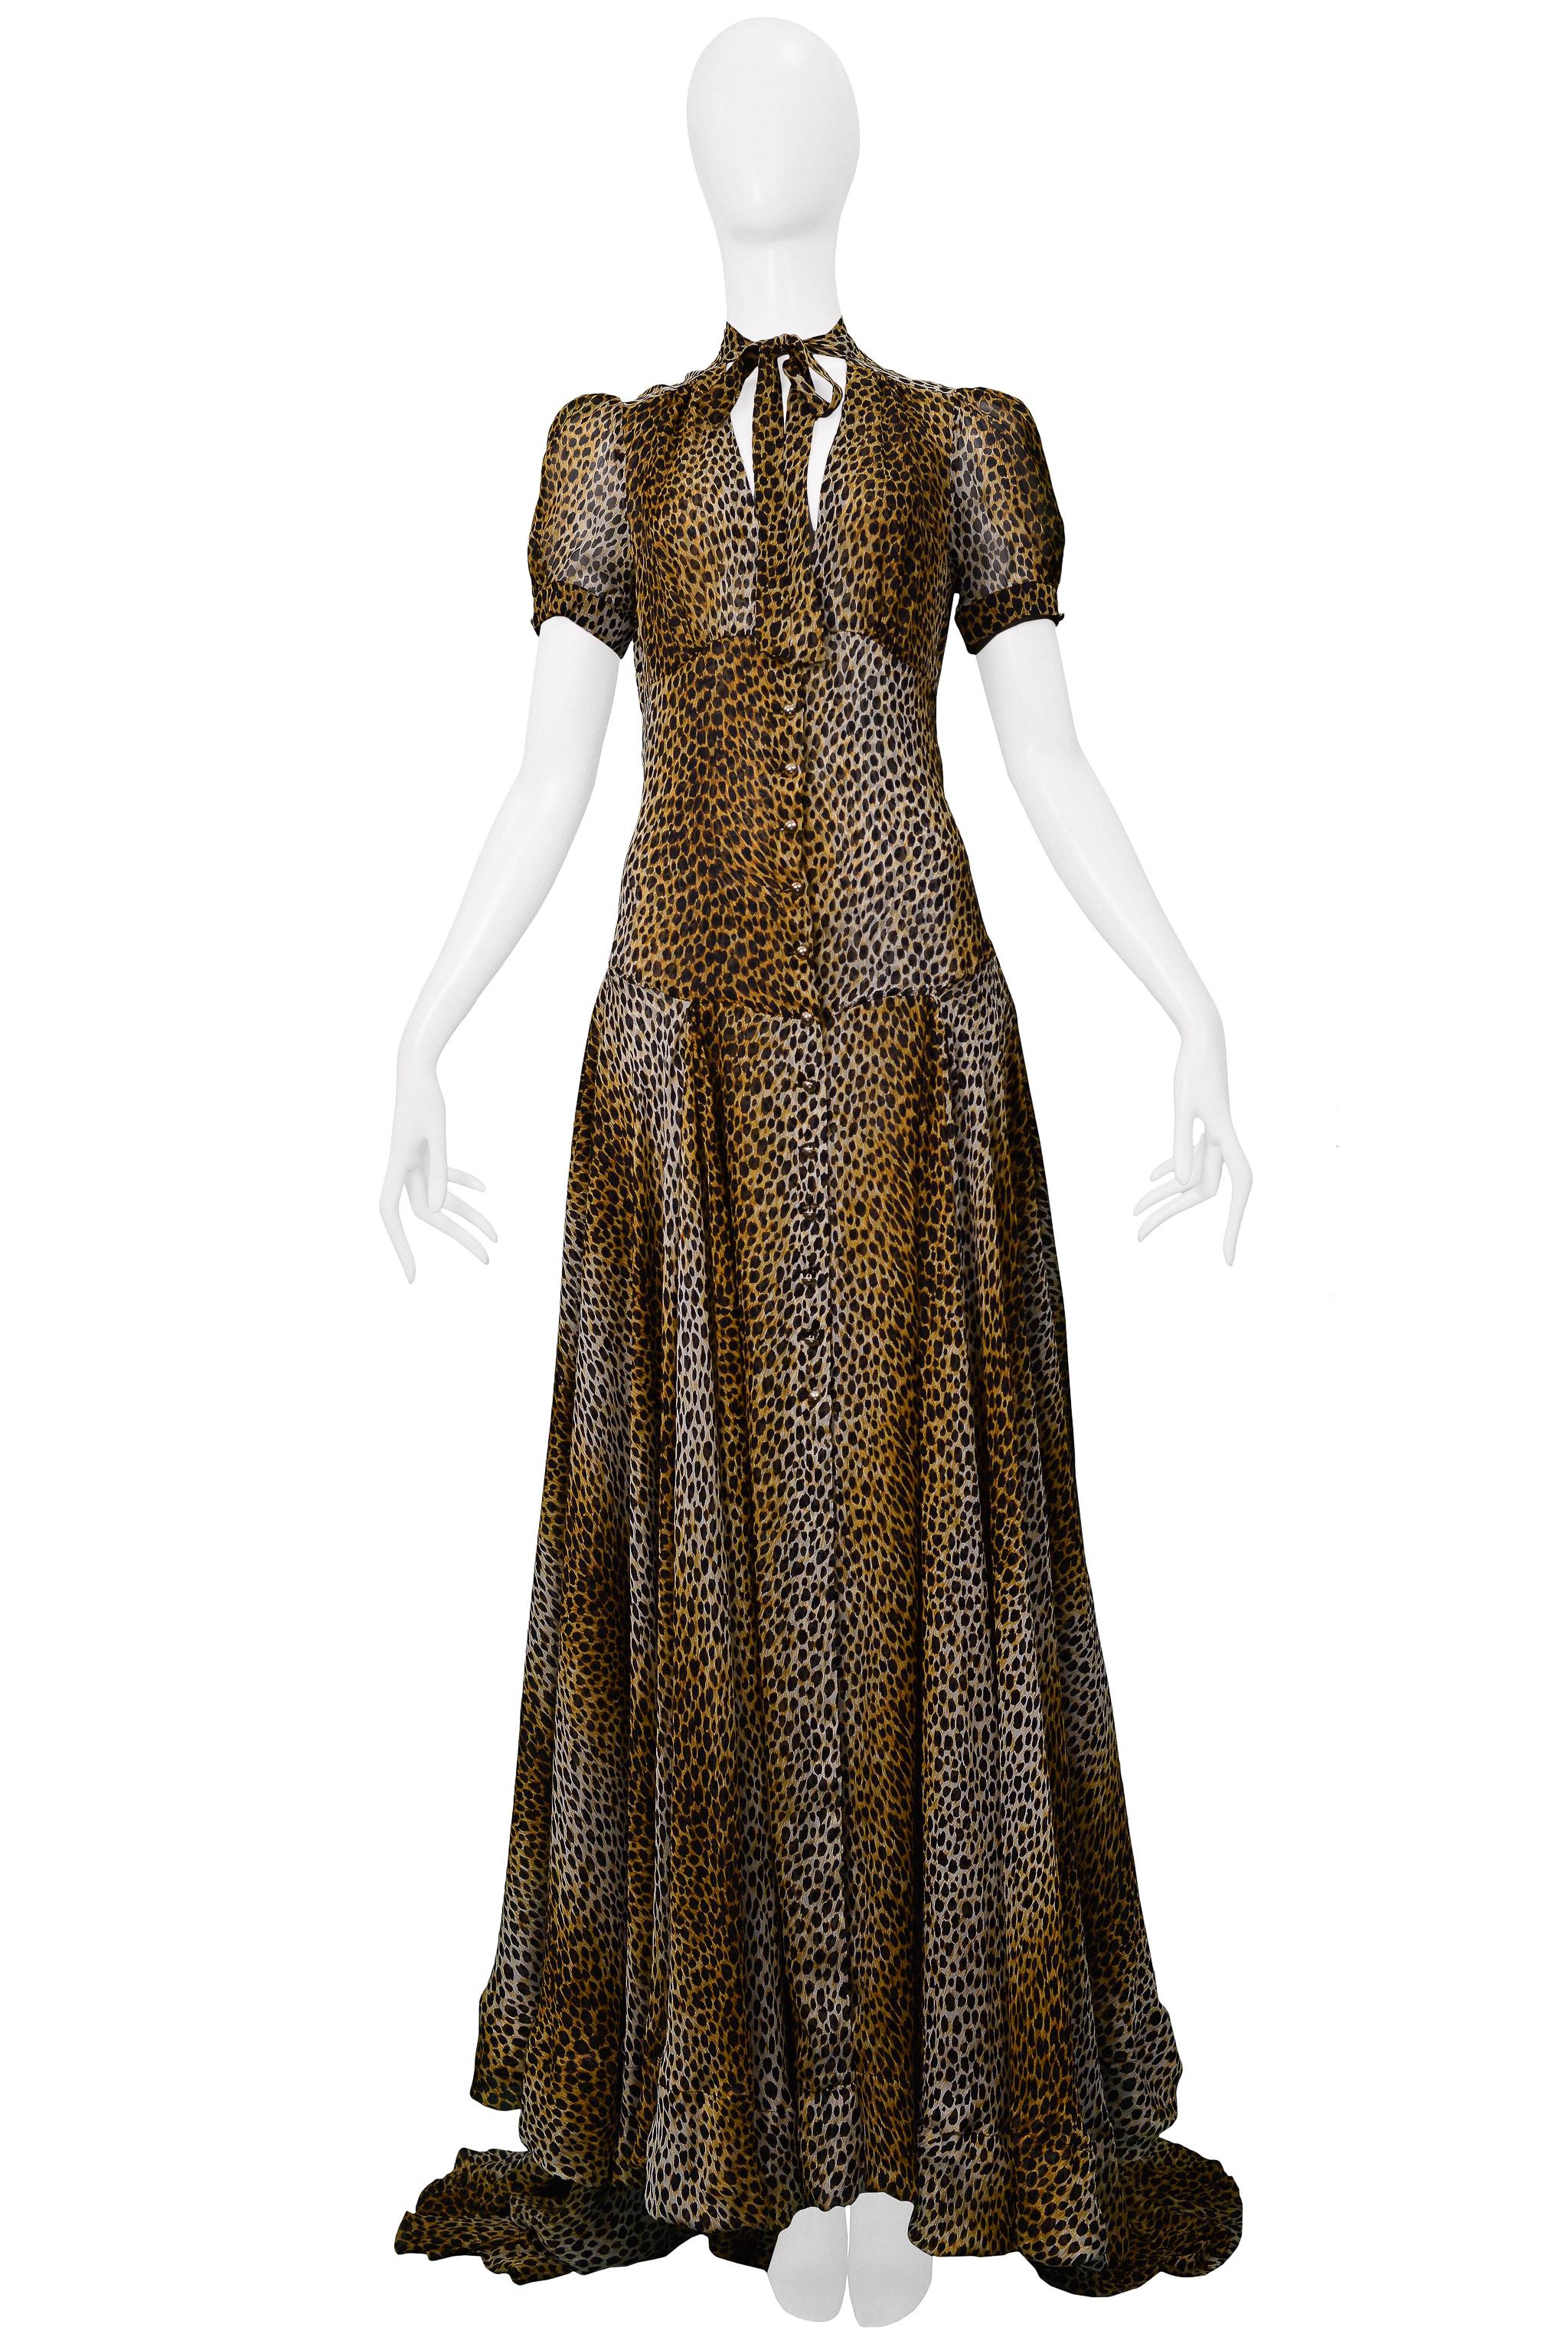 Resurrection is excited to offer a vintage Dolce & Gabbana D&G leopard print evening gown featuring a keyhole front, necktie, gold buttons, short sleeves, semi-sheer fabric, full-length skirt with a longer train panel in the back. 

Dolce & Gabbana